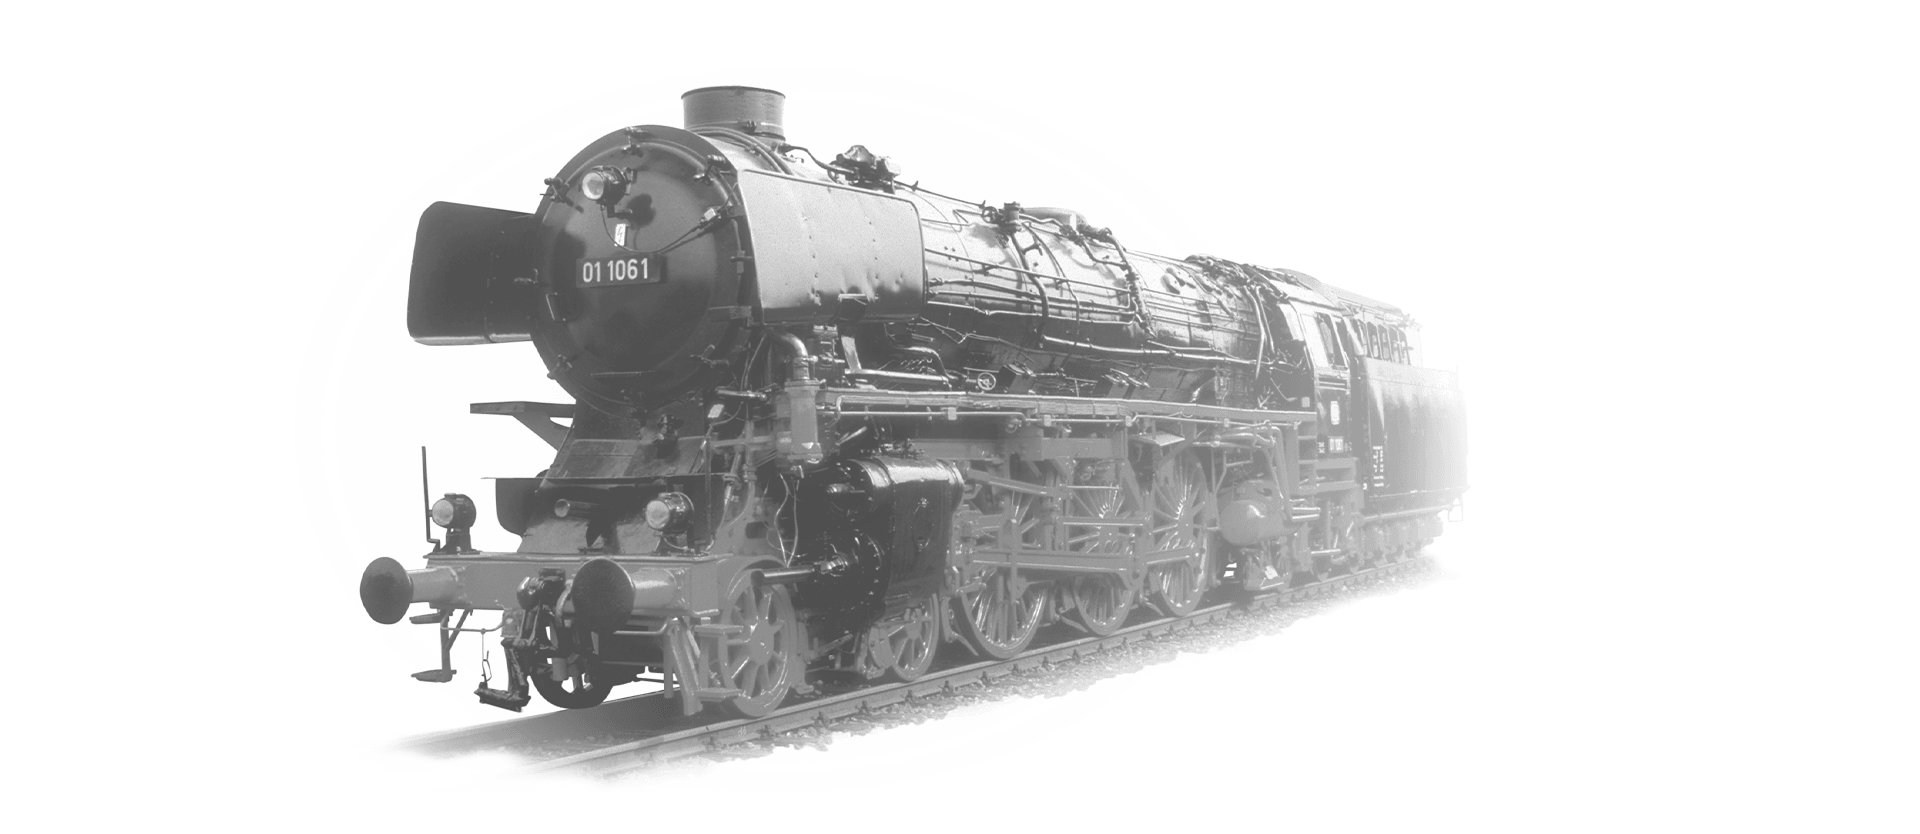 The locomotive 01-1061 is coming towards the camera in black and white